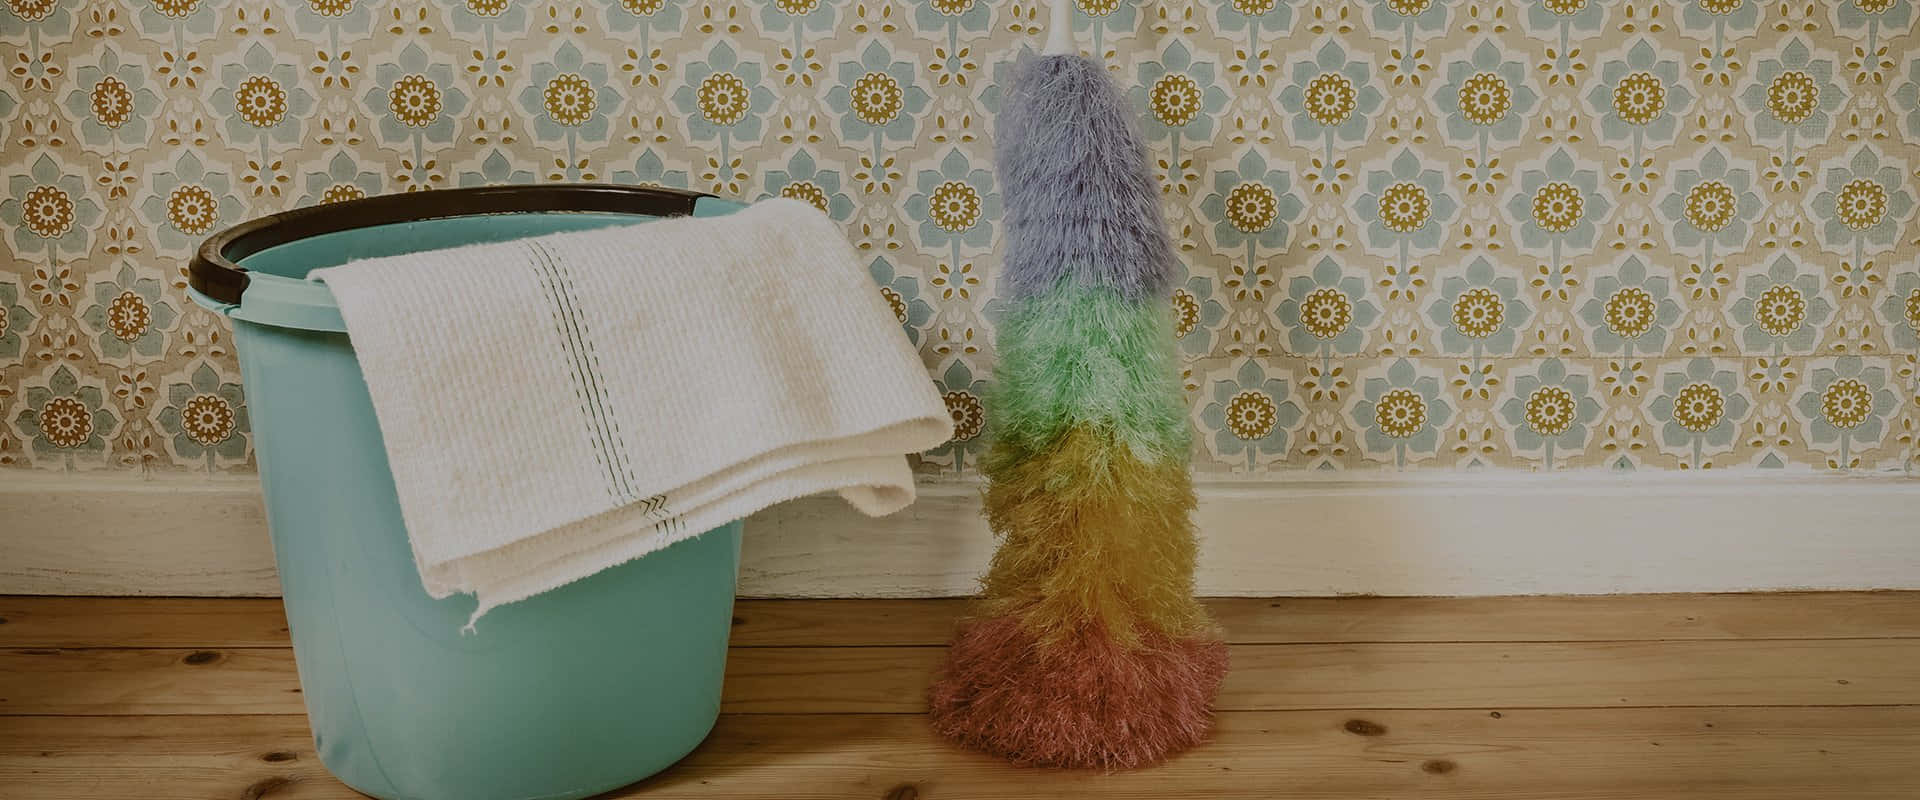 Cleaning Bucket Towel Duster Background